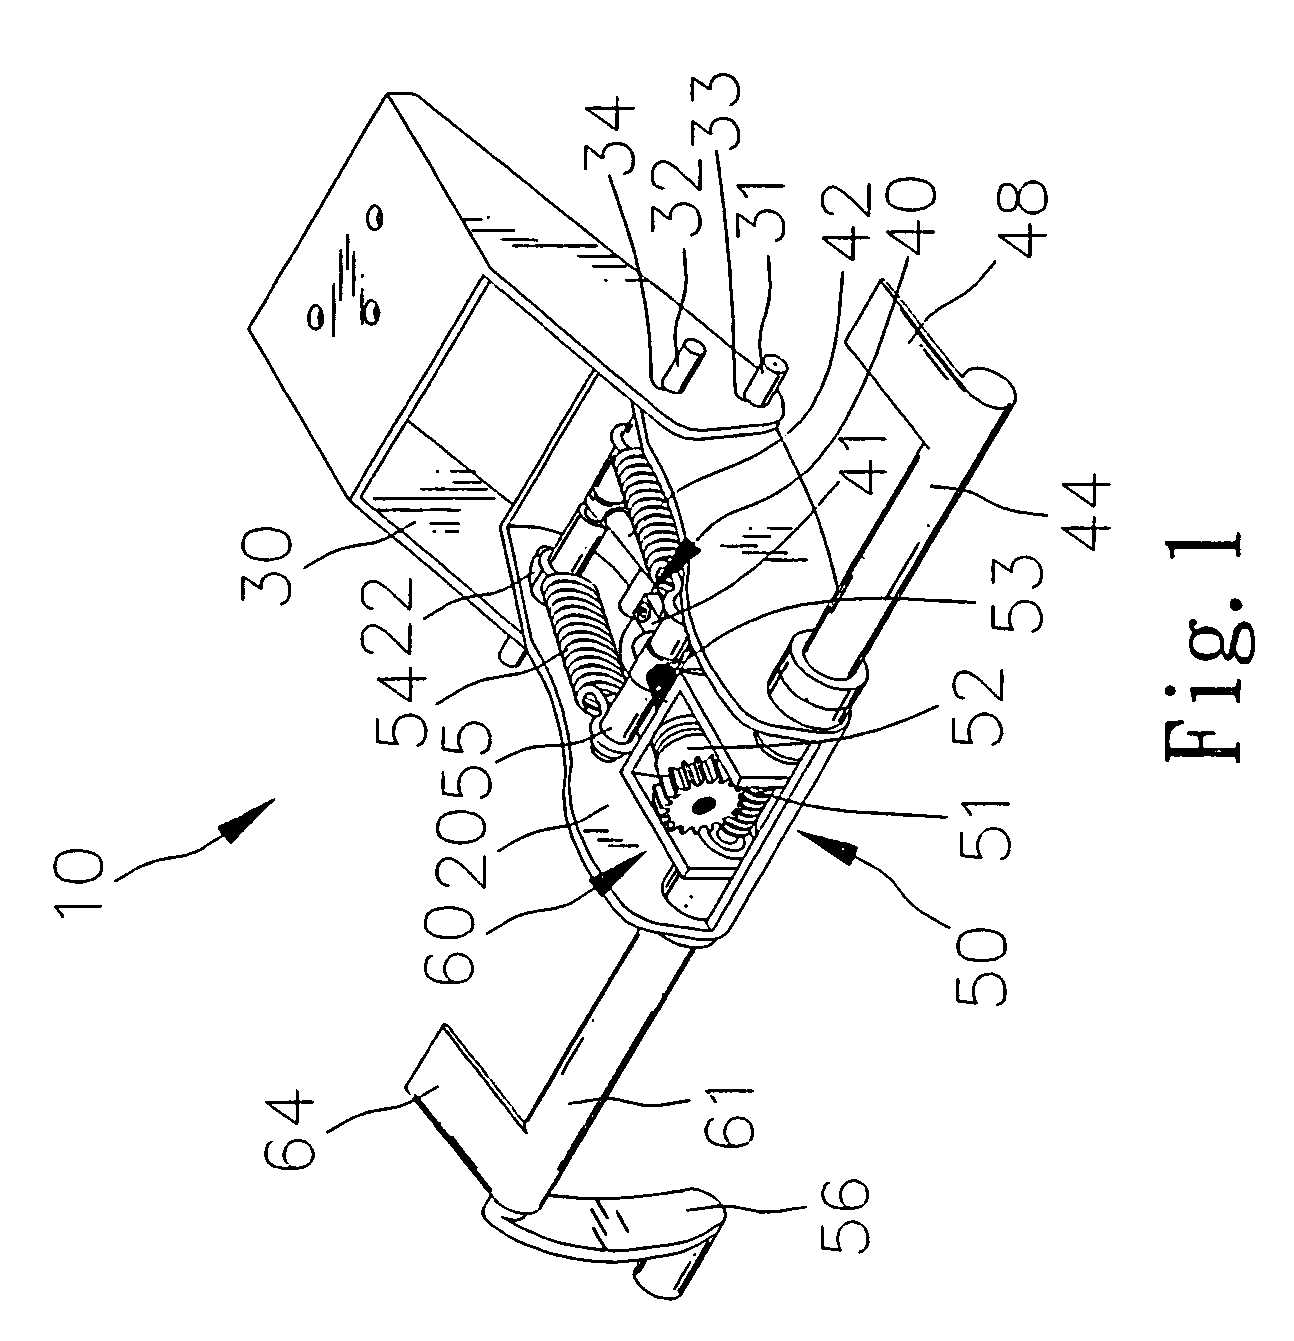 Reclining apparatus for chair